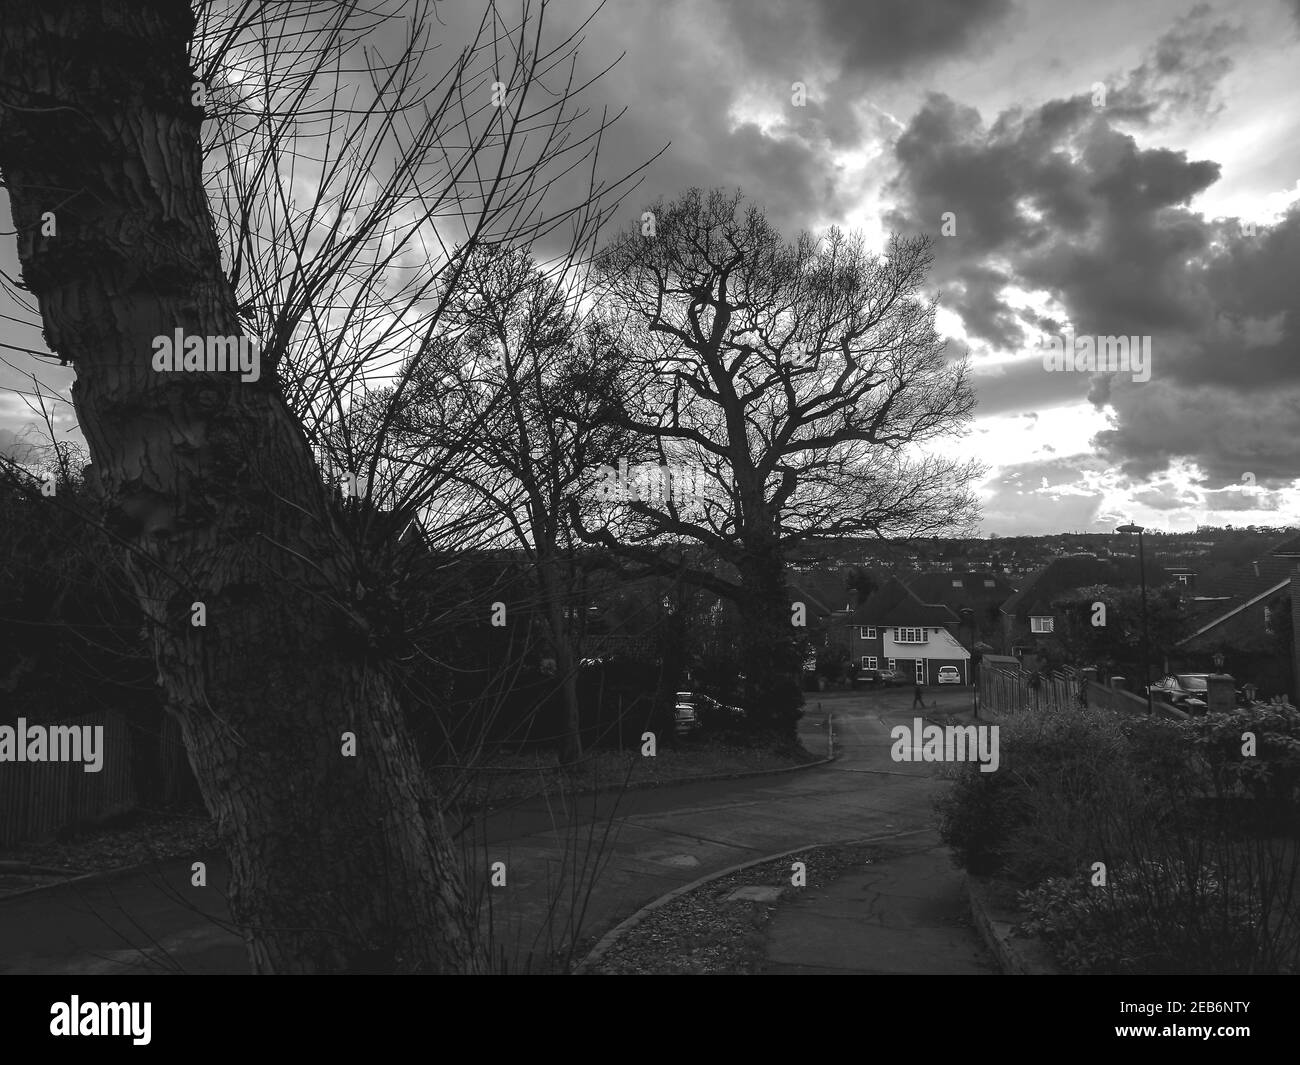 An approaching storm over a suburban landscape in Enfield, London, UK Stock Photo